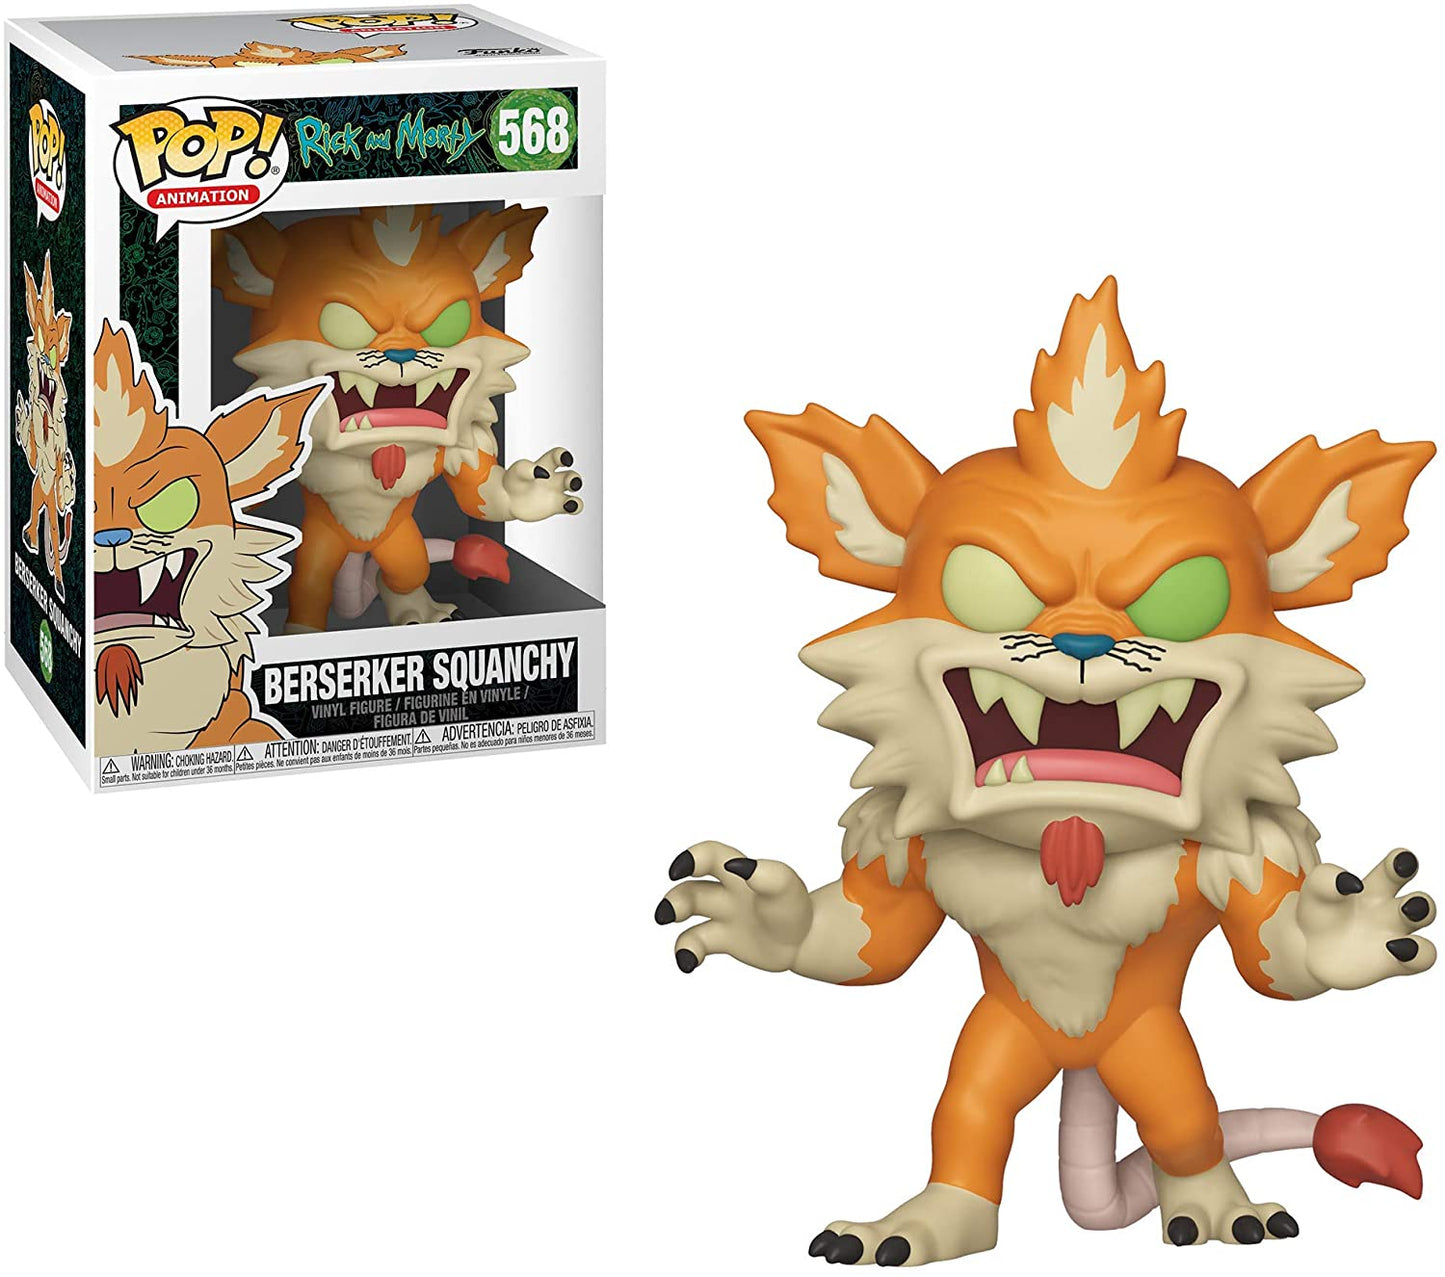 RICK AND MORTY ANIMATION BERSERKER SQUANCHY #568 POP